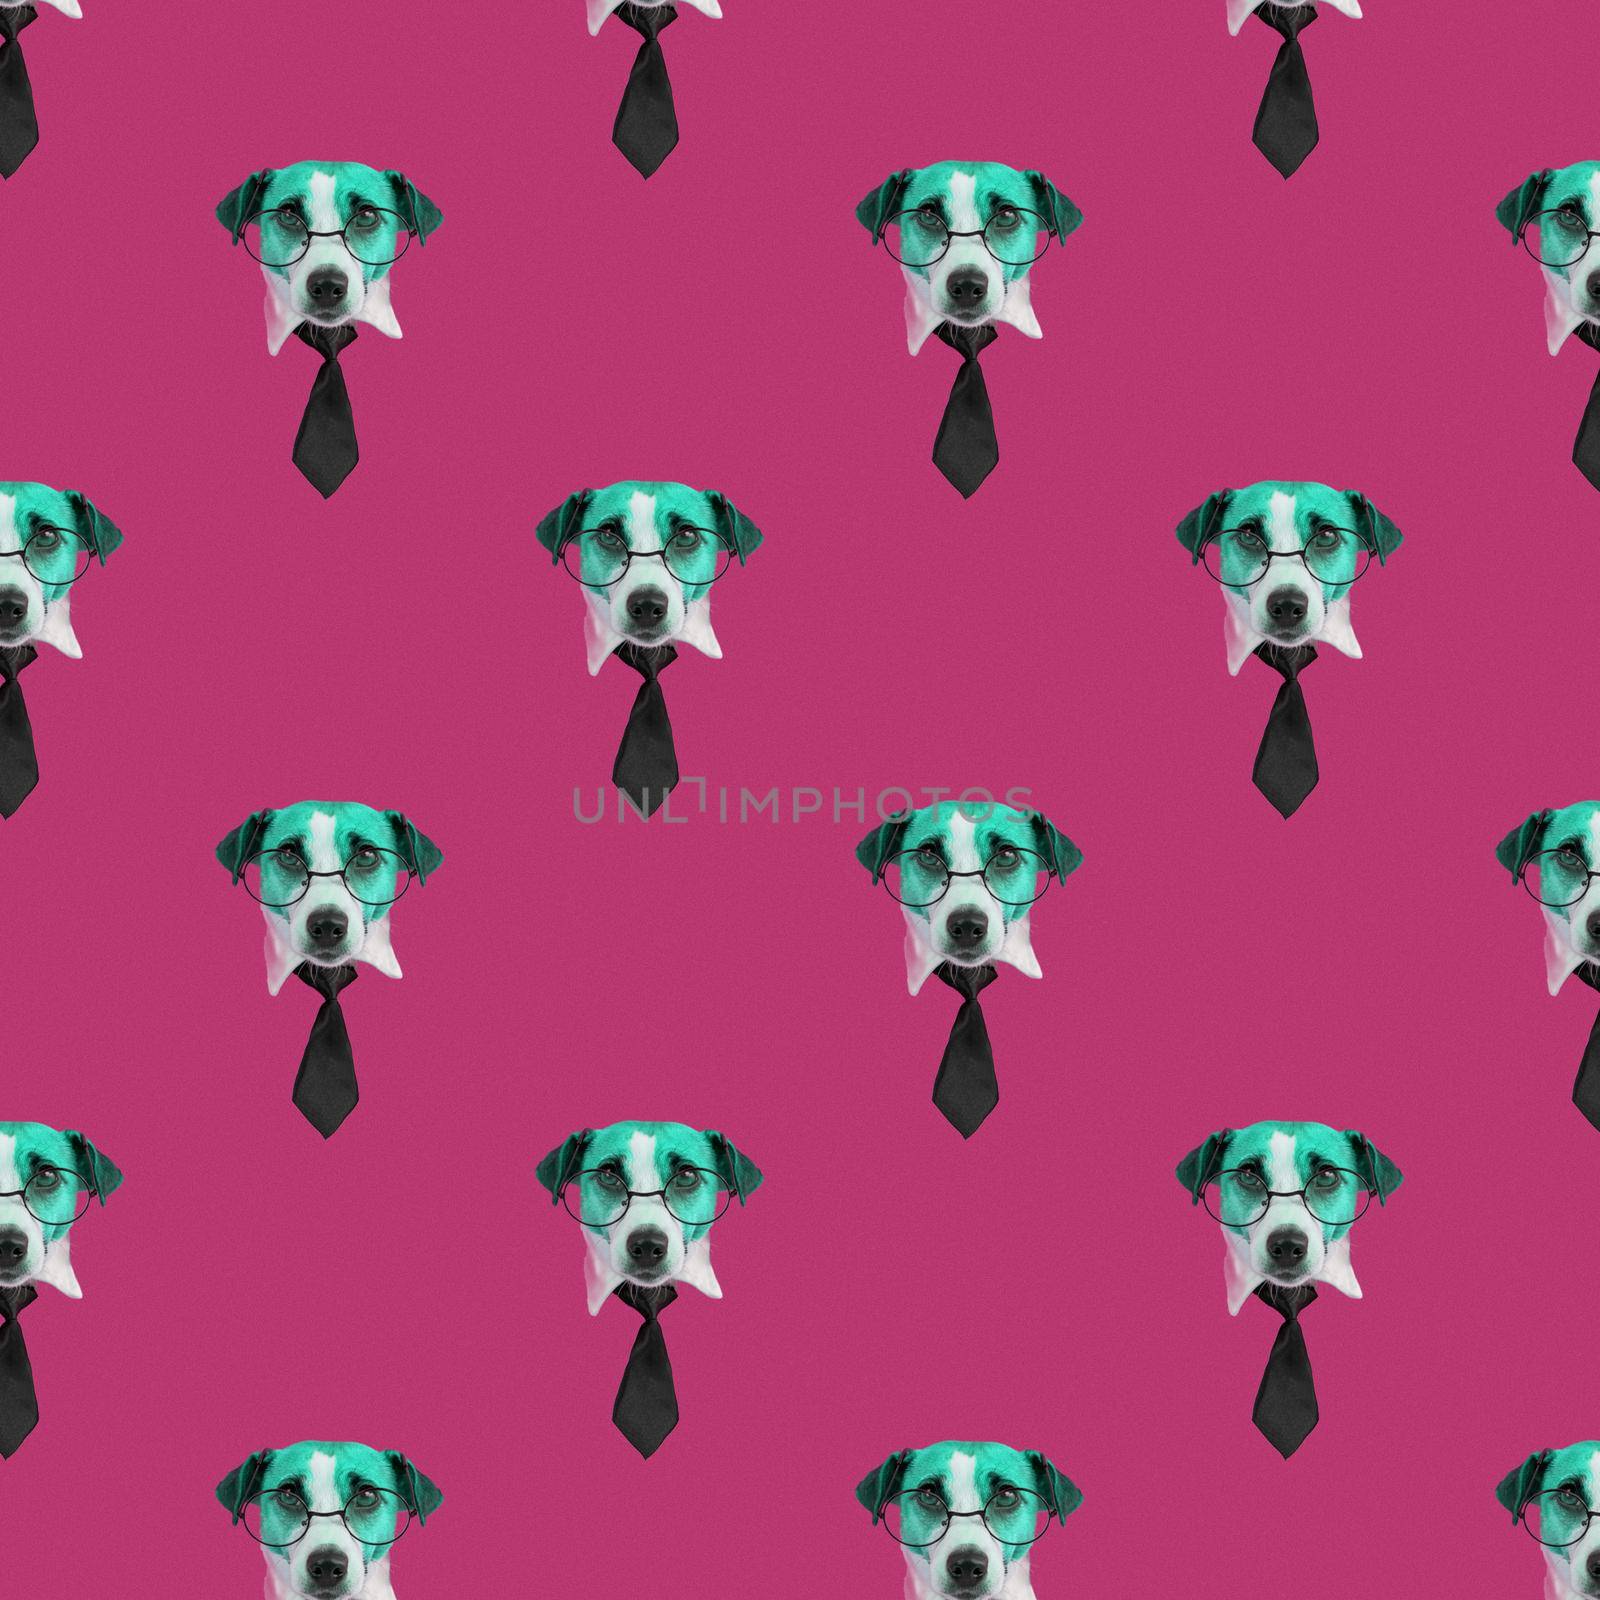 Muzzle of a Jack Russell Terrier dog with glasses and a tie on a pink background. Isolate. Seamless pattern